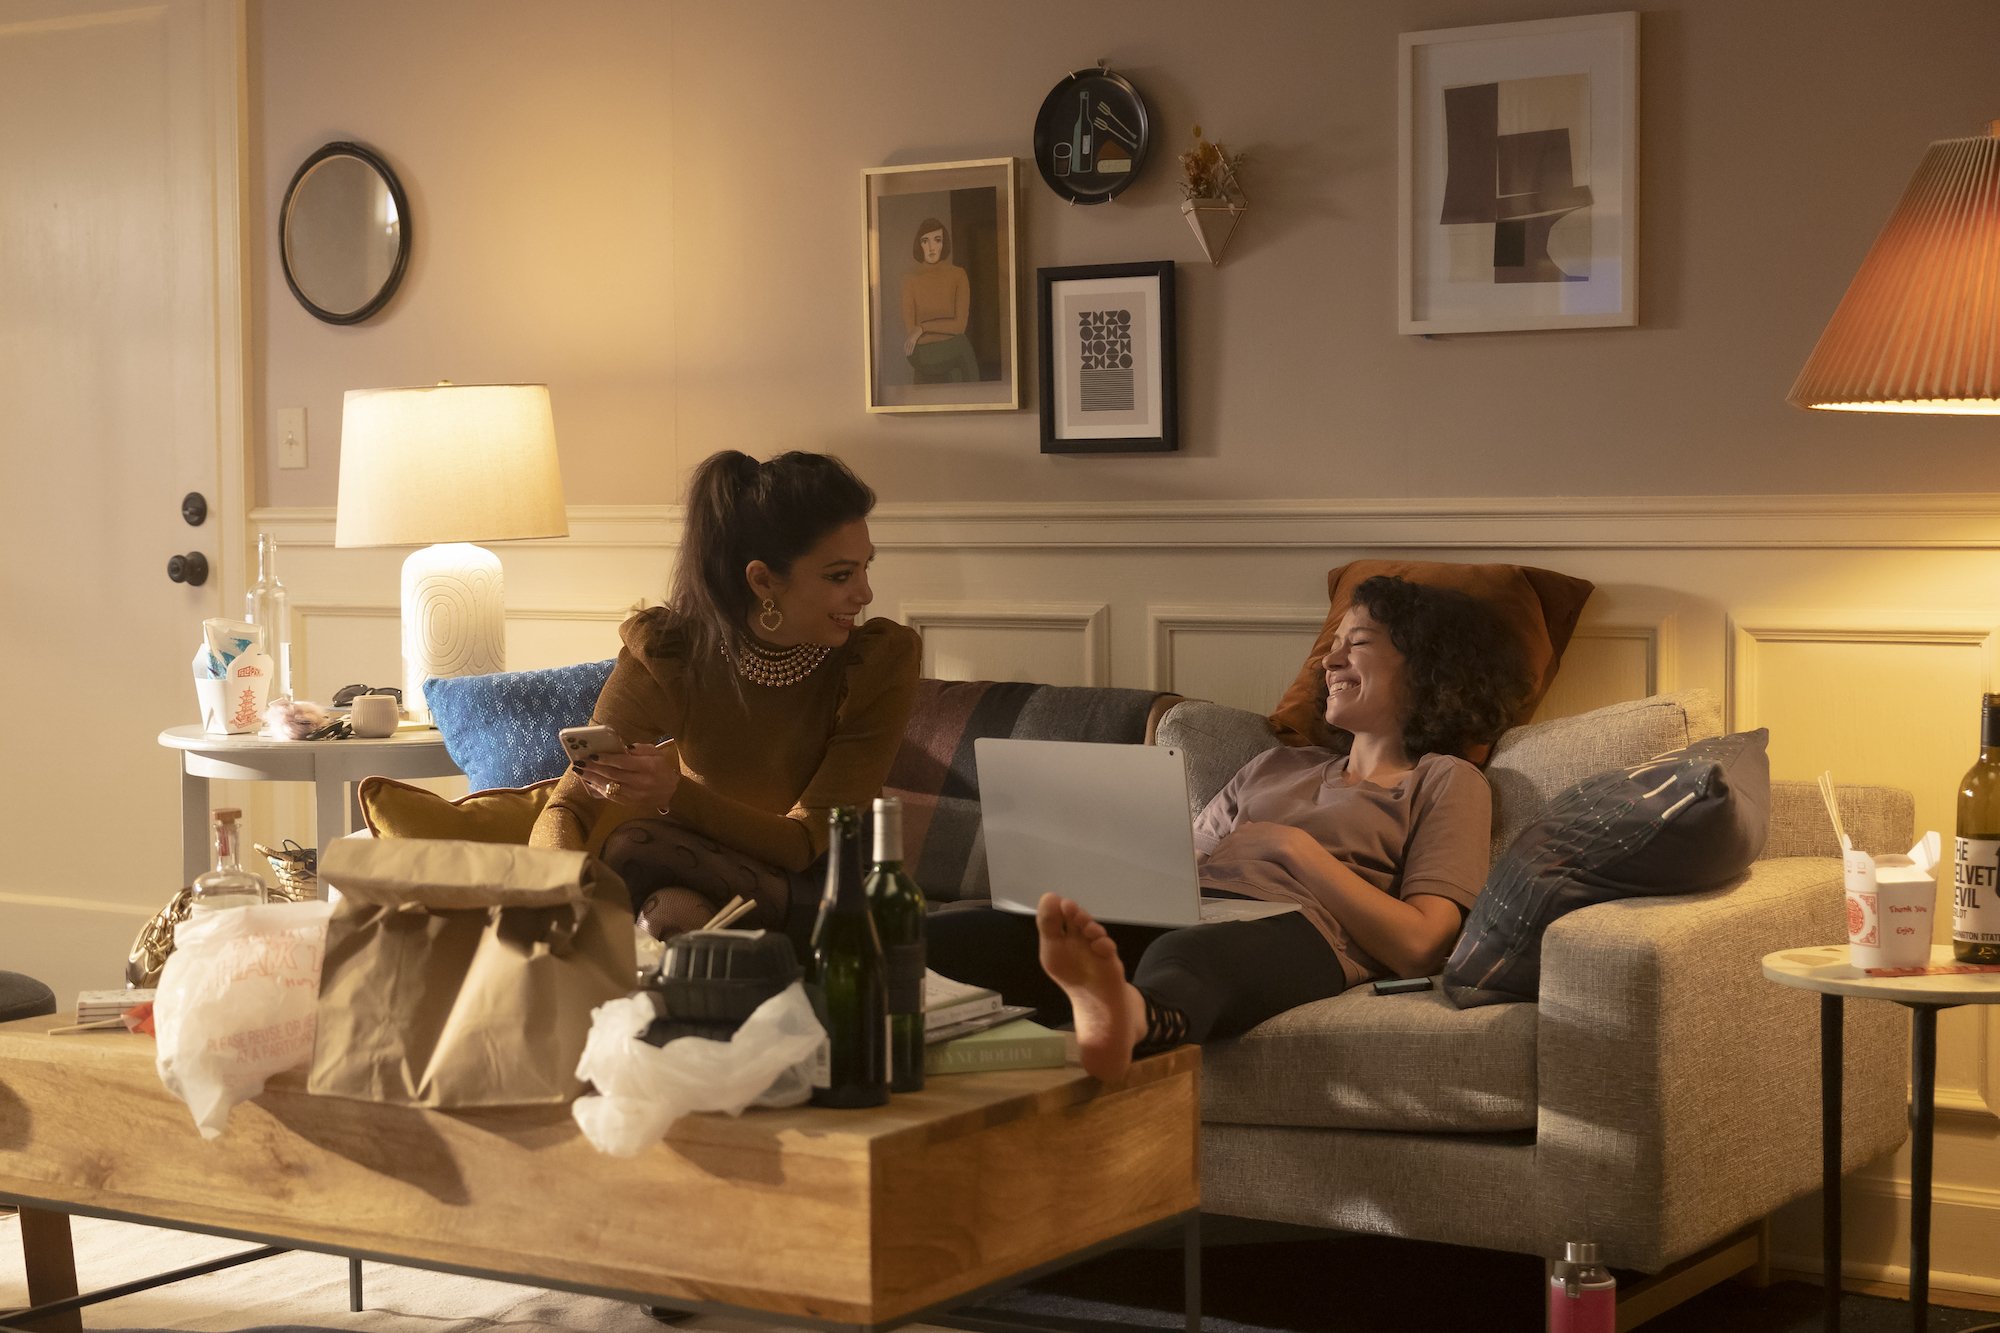 Ginger Gonzaga and Tatiana Maslany, in character as Nikki Ramos and Jennifer Walters in 'She-Hulk: Attorney at Law' on Disney+, which may feature the introduction of the Fantastic Four, share a scene on the couch. Nikki wears a brown long-sleeved shirt and tights. Jennifer wears a gray shirt and black leggings.